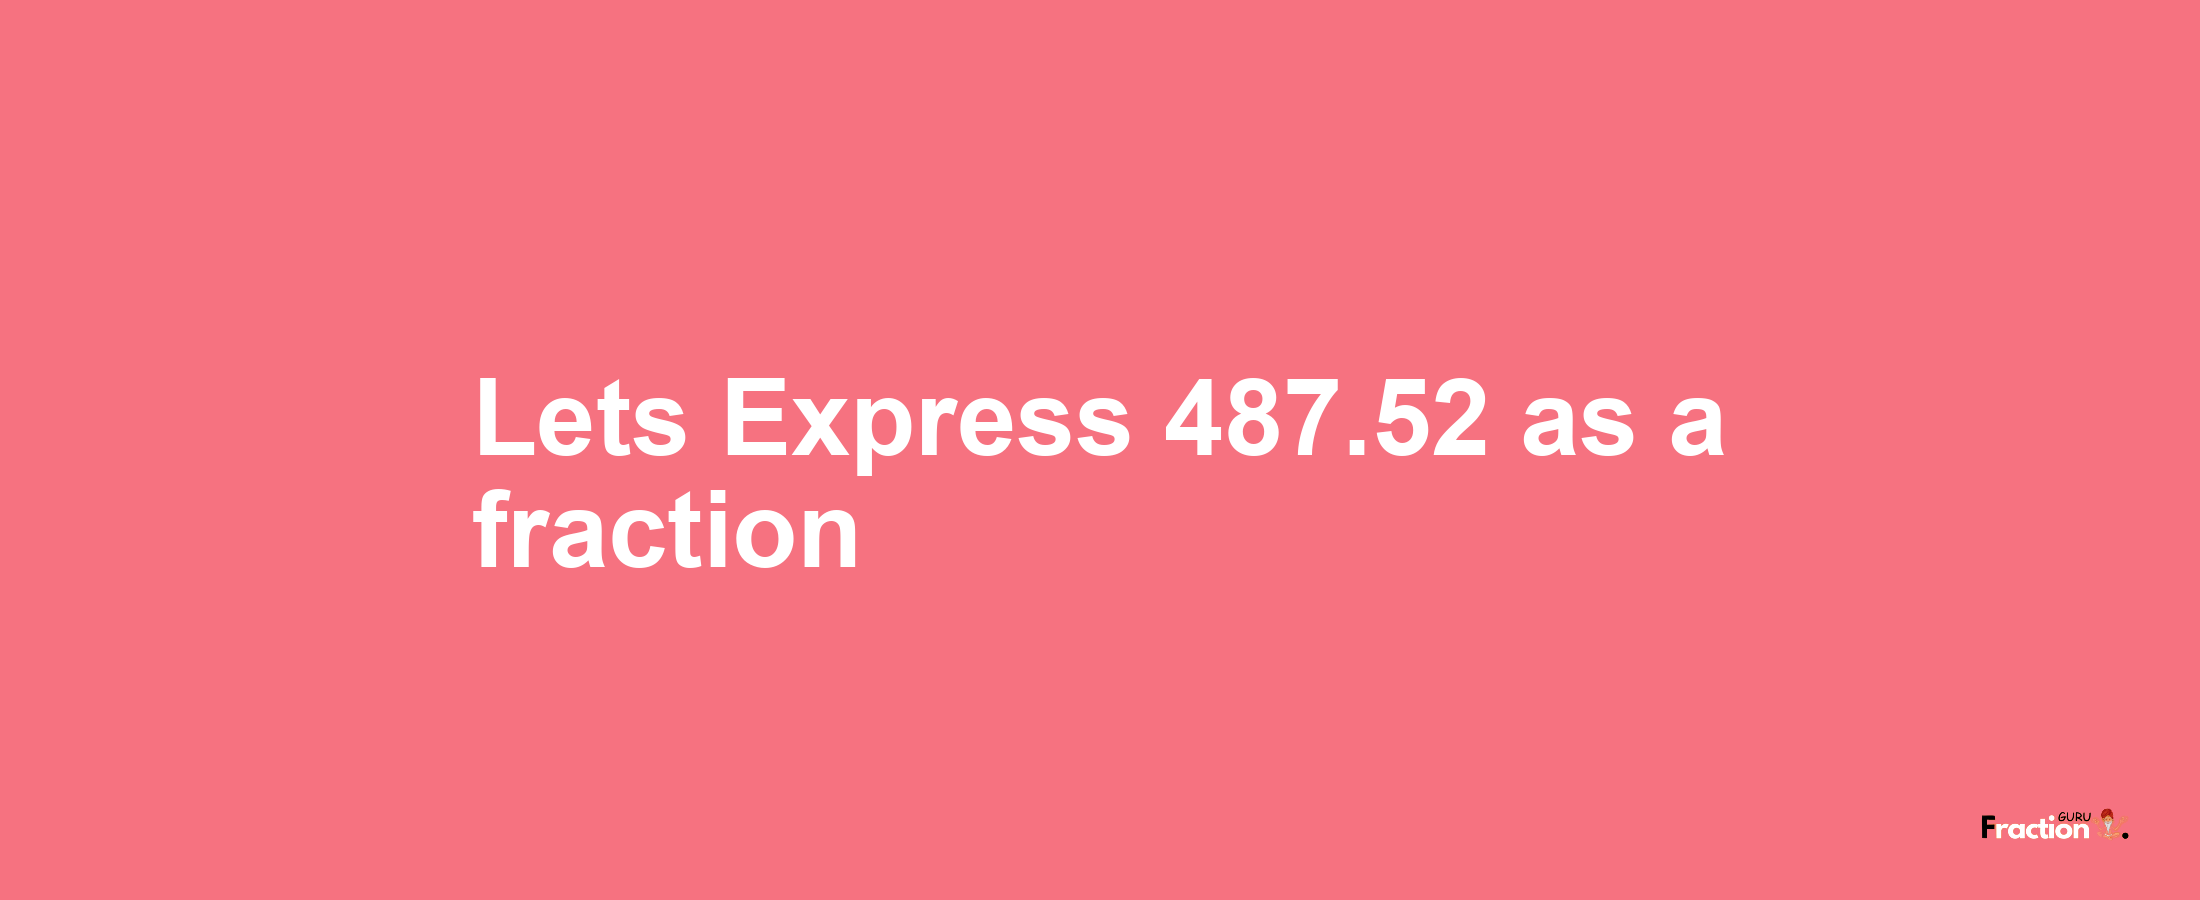 Lets Express 487.52 as afraction